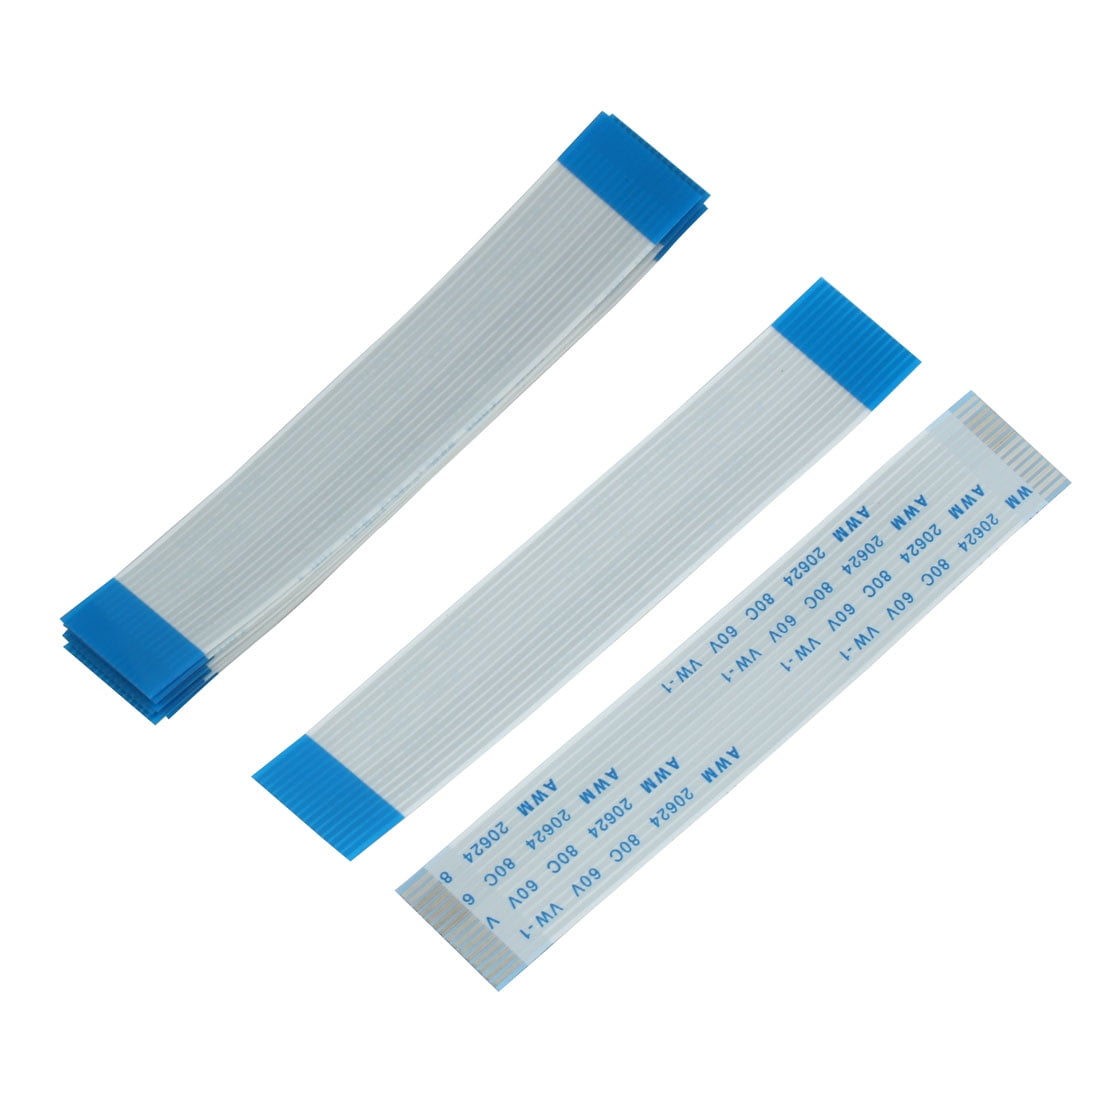 26-Pin Forward Reverse FFC/FPC Flexible Flat Ribbon Cable Pitch 0.5mm 1.0mm 